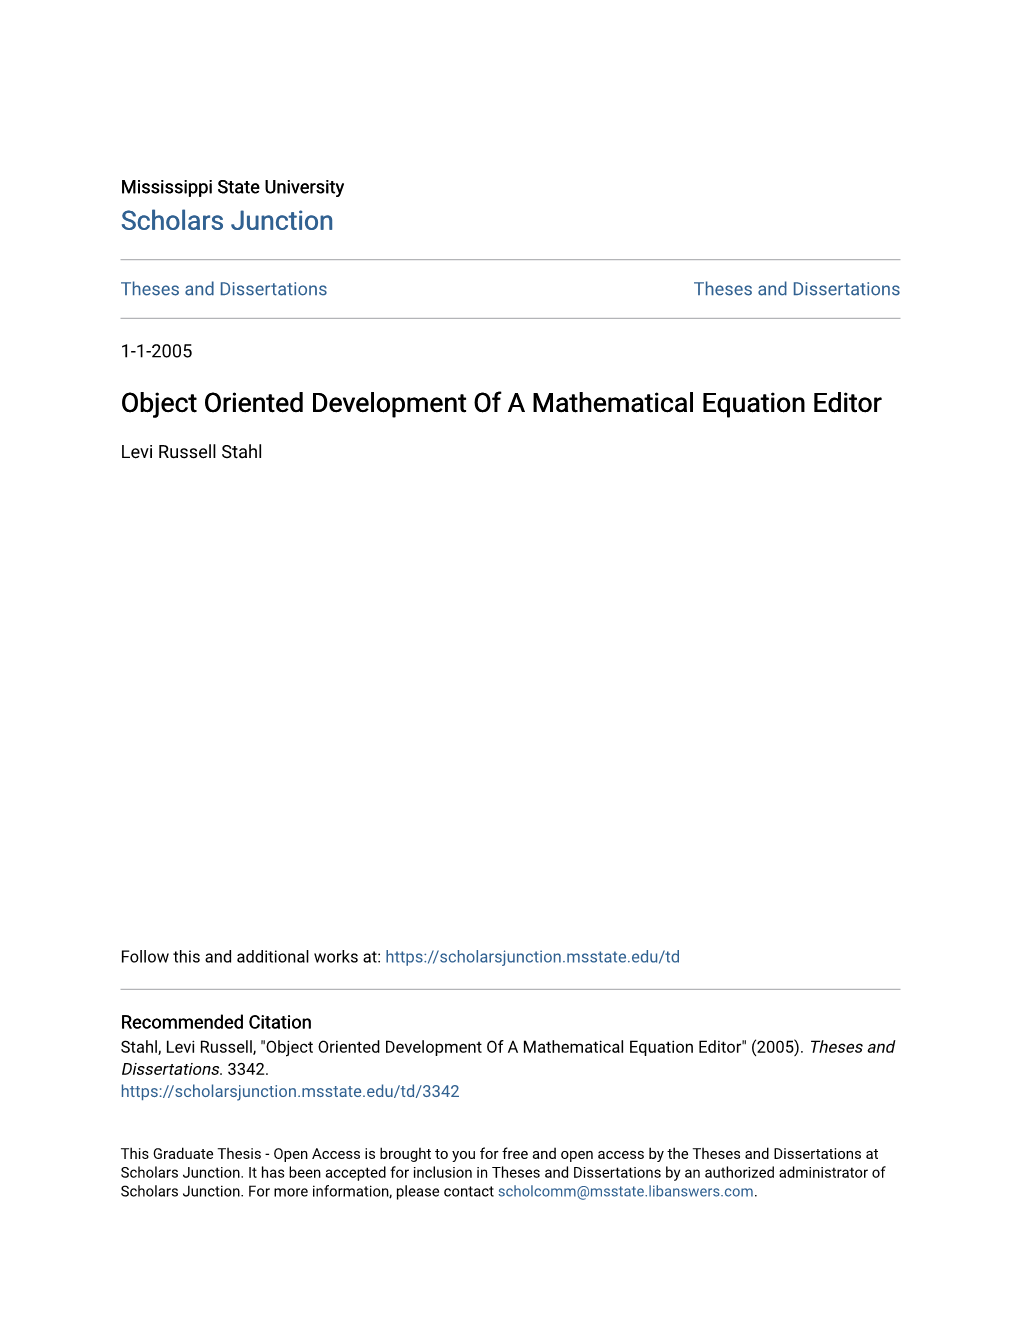 Object Oriented Development of a Mathematical Equation Editor